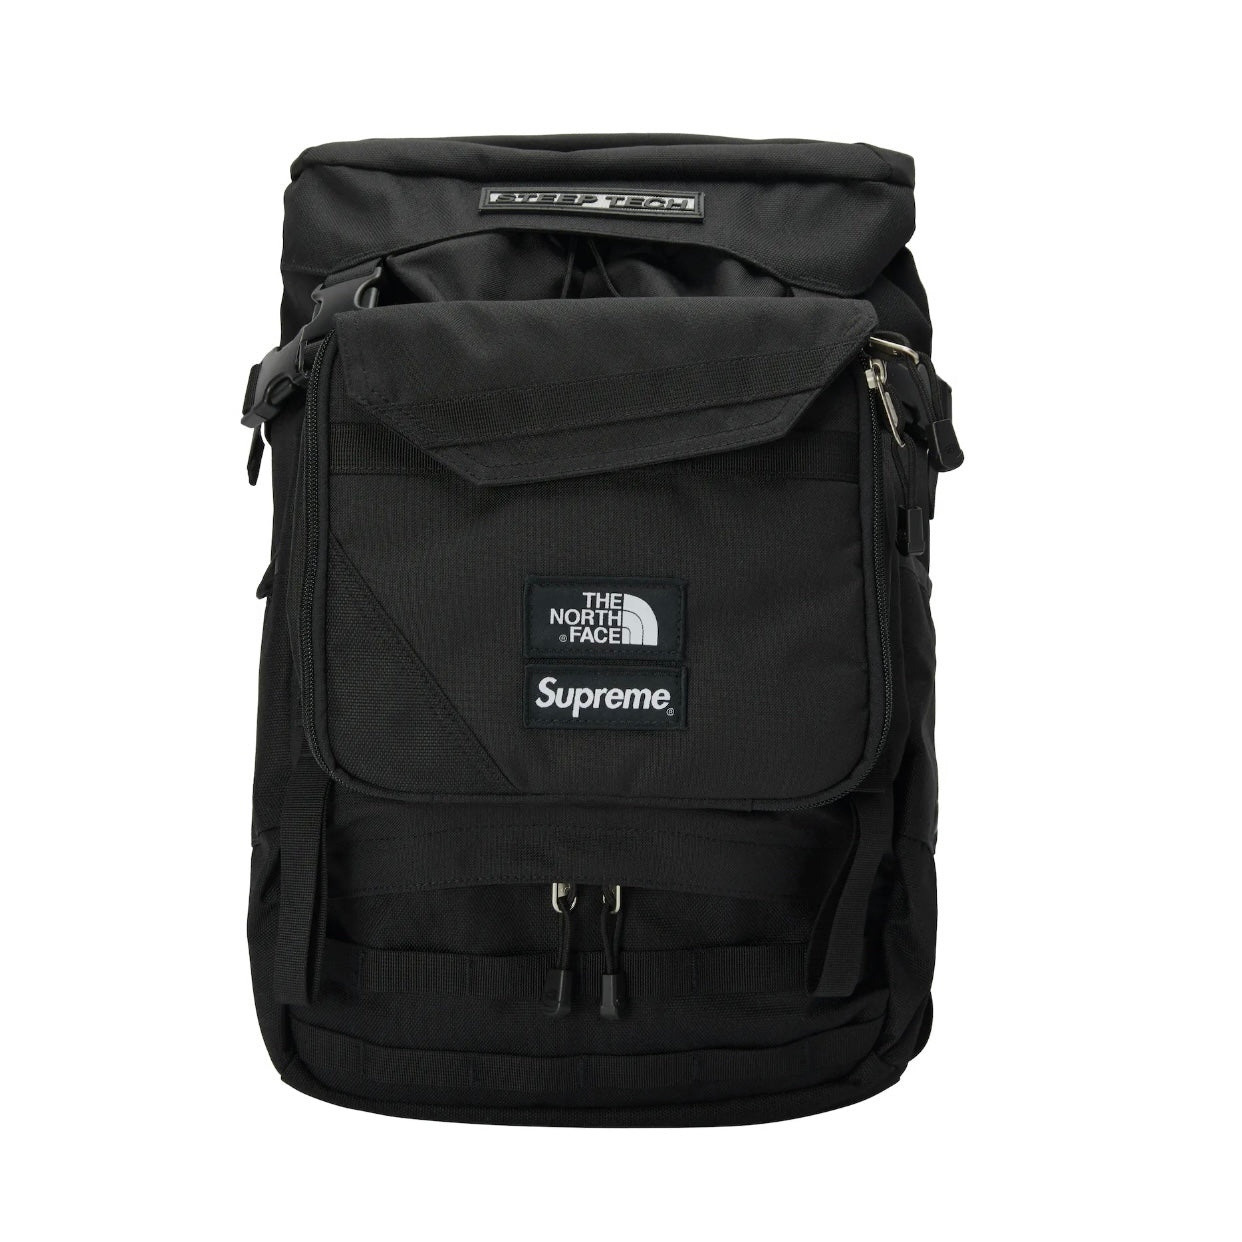 Supreme North Face Steep Tech Backpack | www.myglobaltax.com